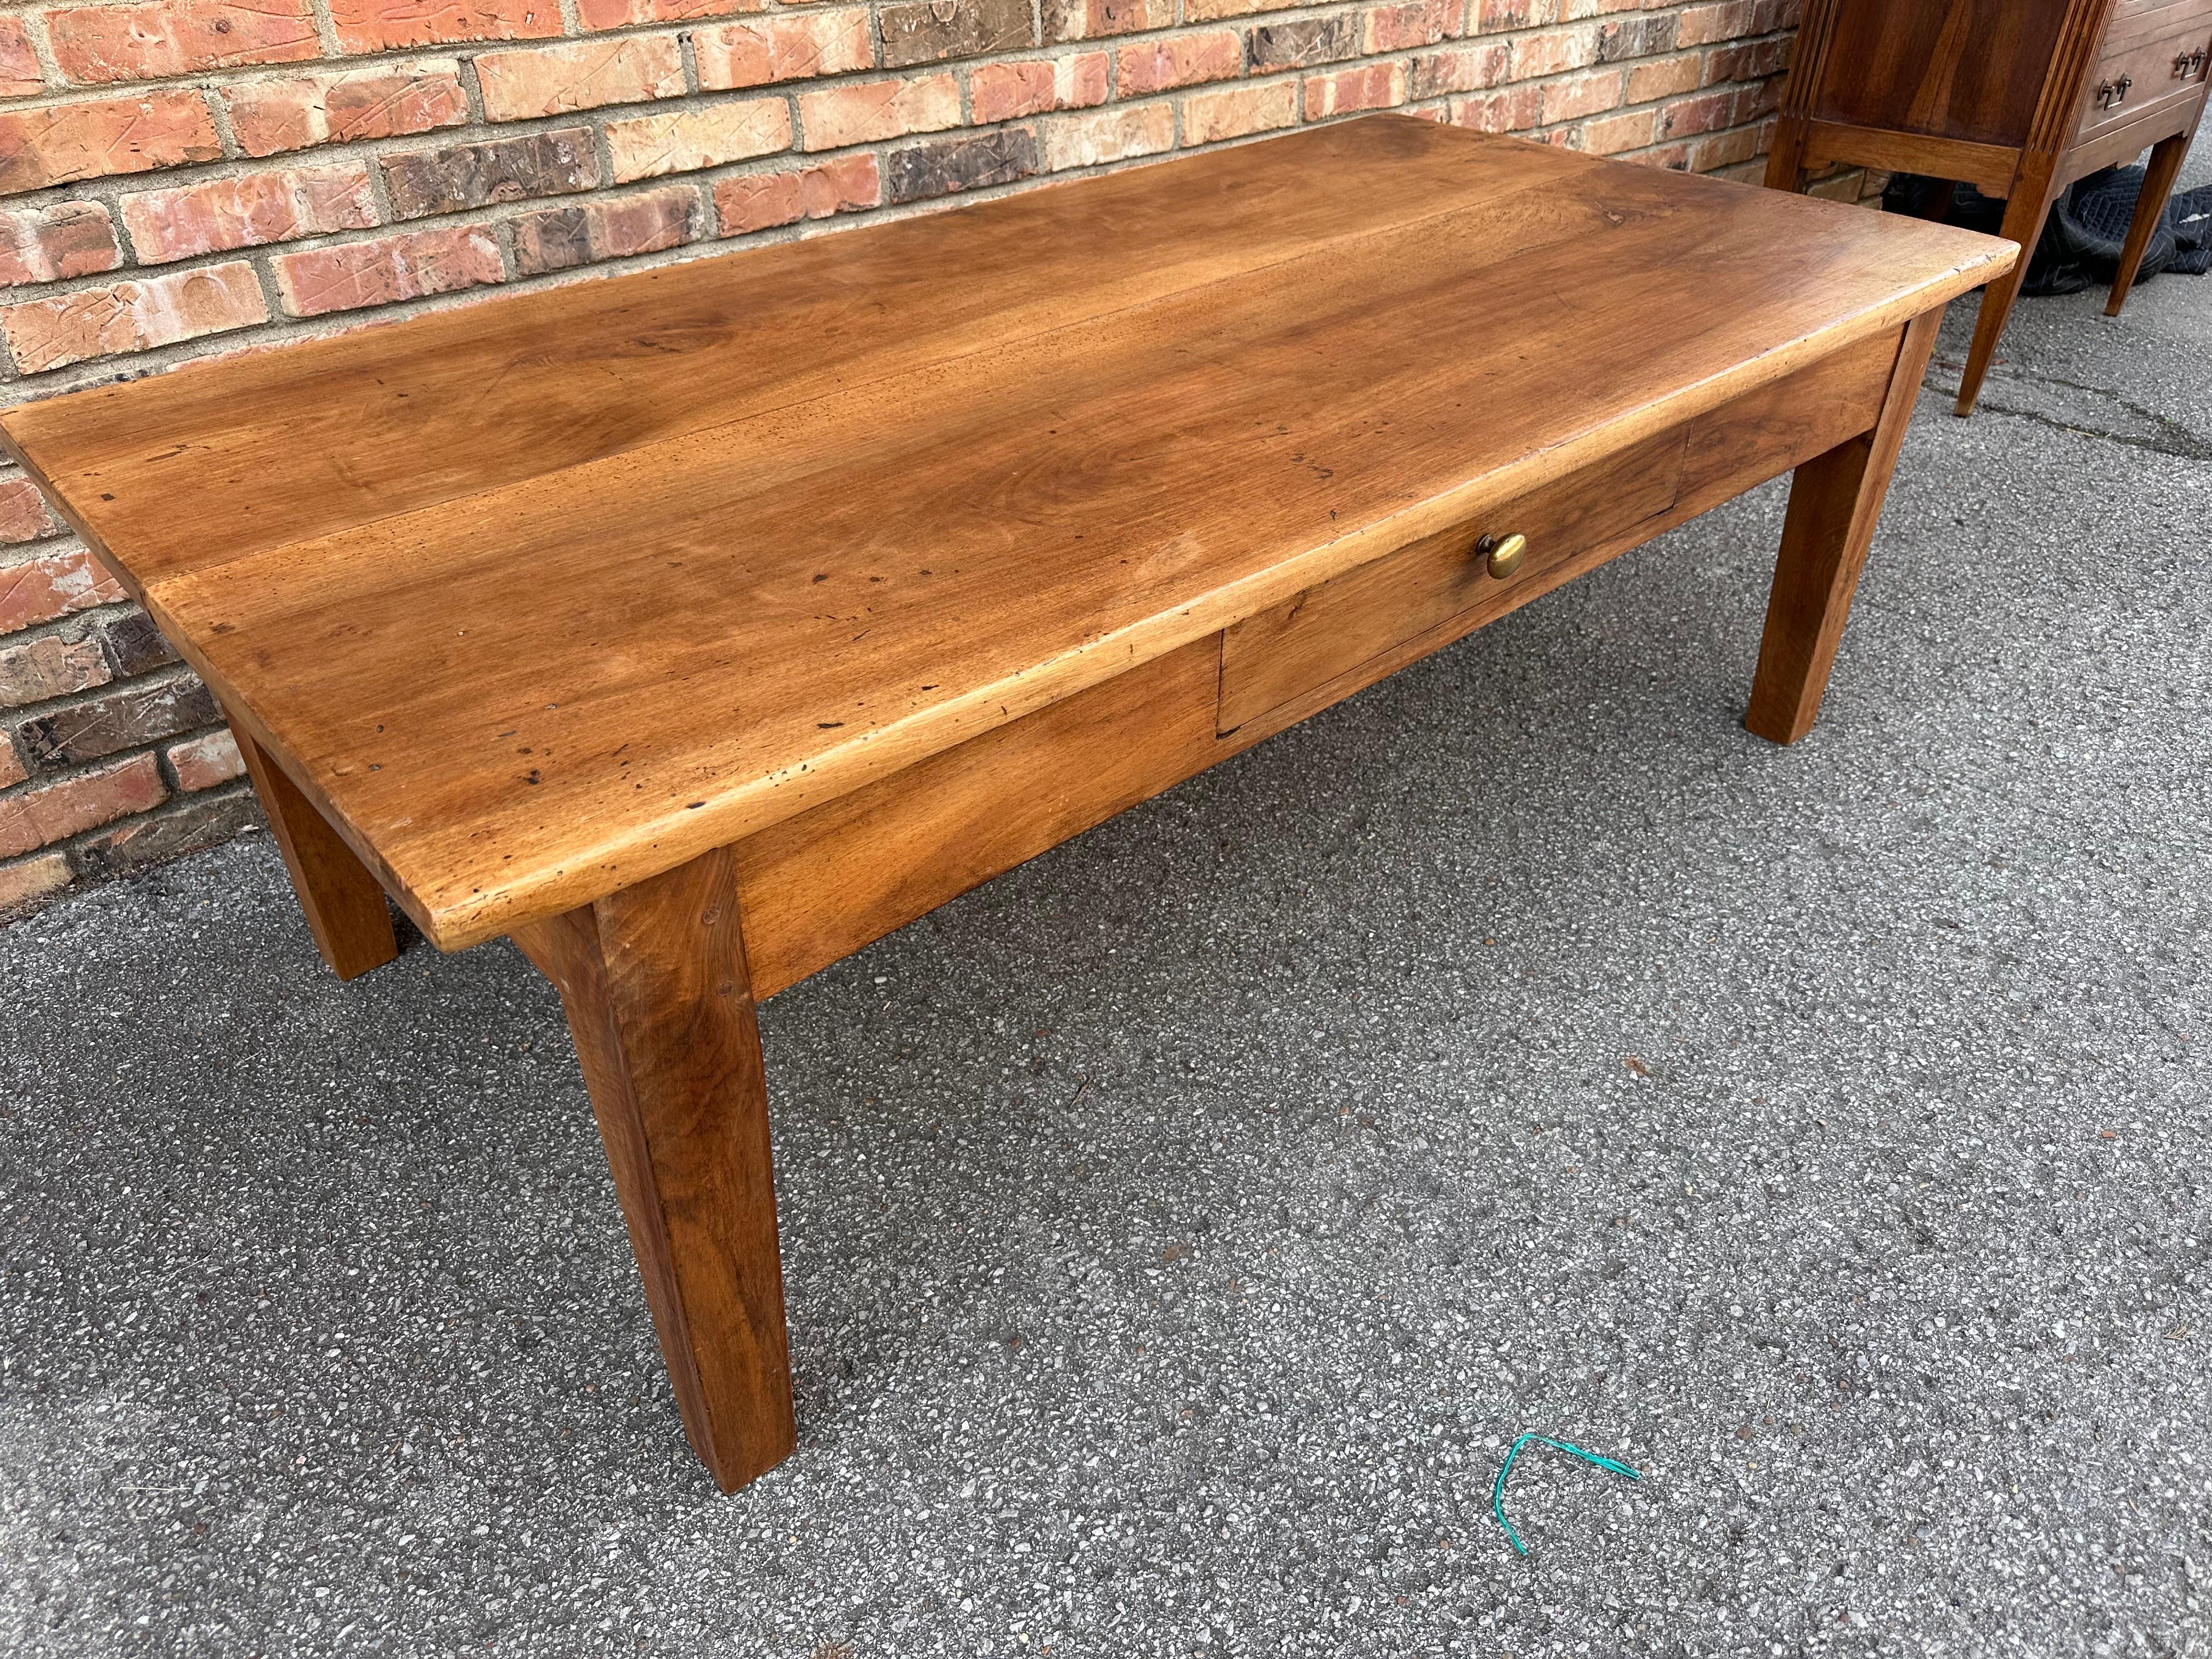 This is a beautiful mid 19th century French coffee table. The walnut wood gives it a nice warm tone and with such amazing patina. A single drawer to hold all the remotes we have to deal with these days. These tables are virtually indestructible